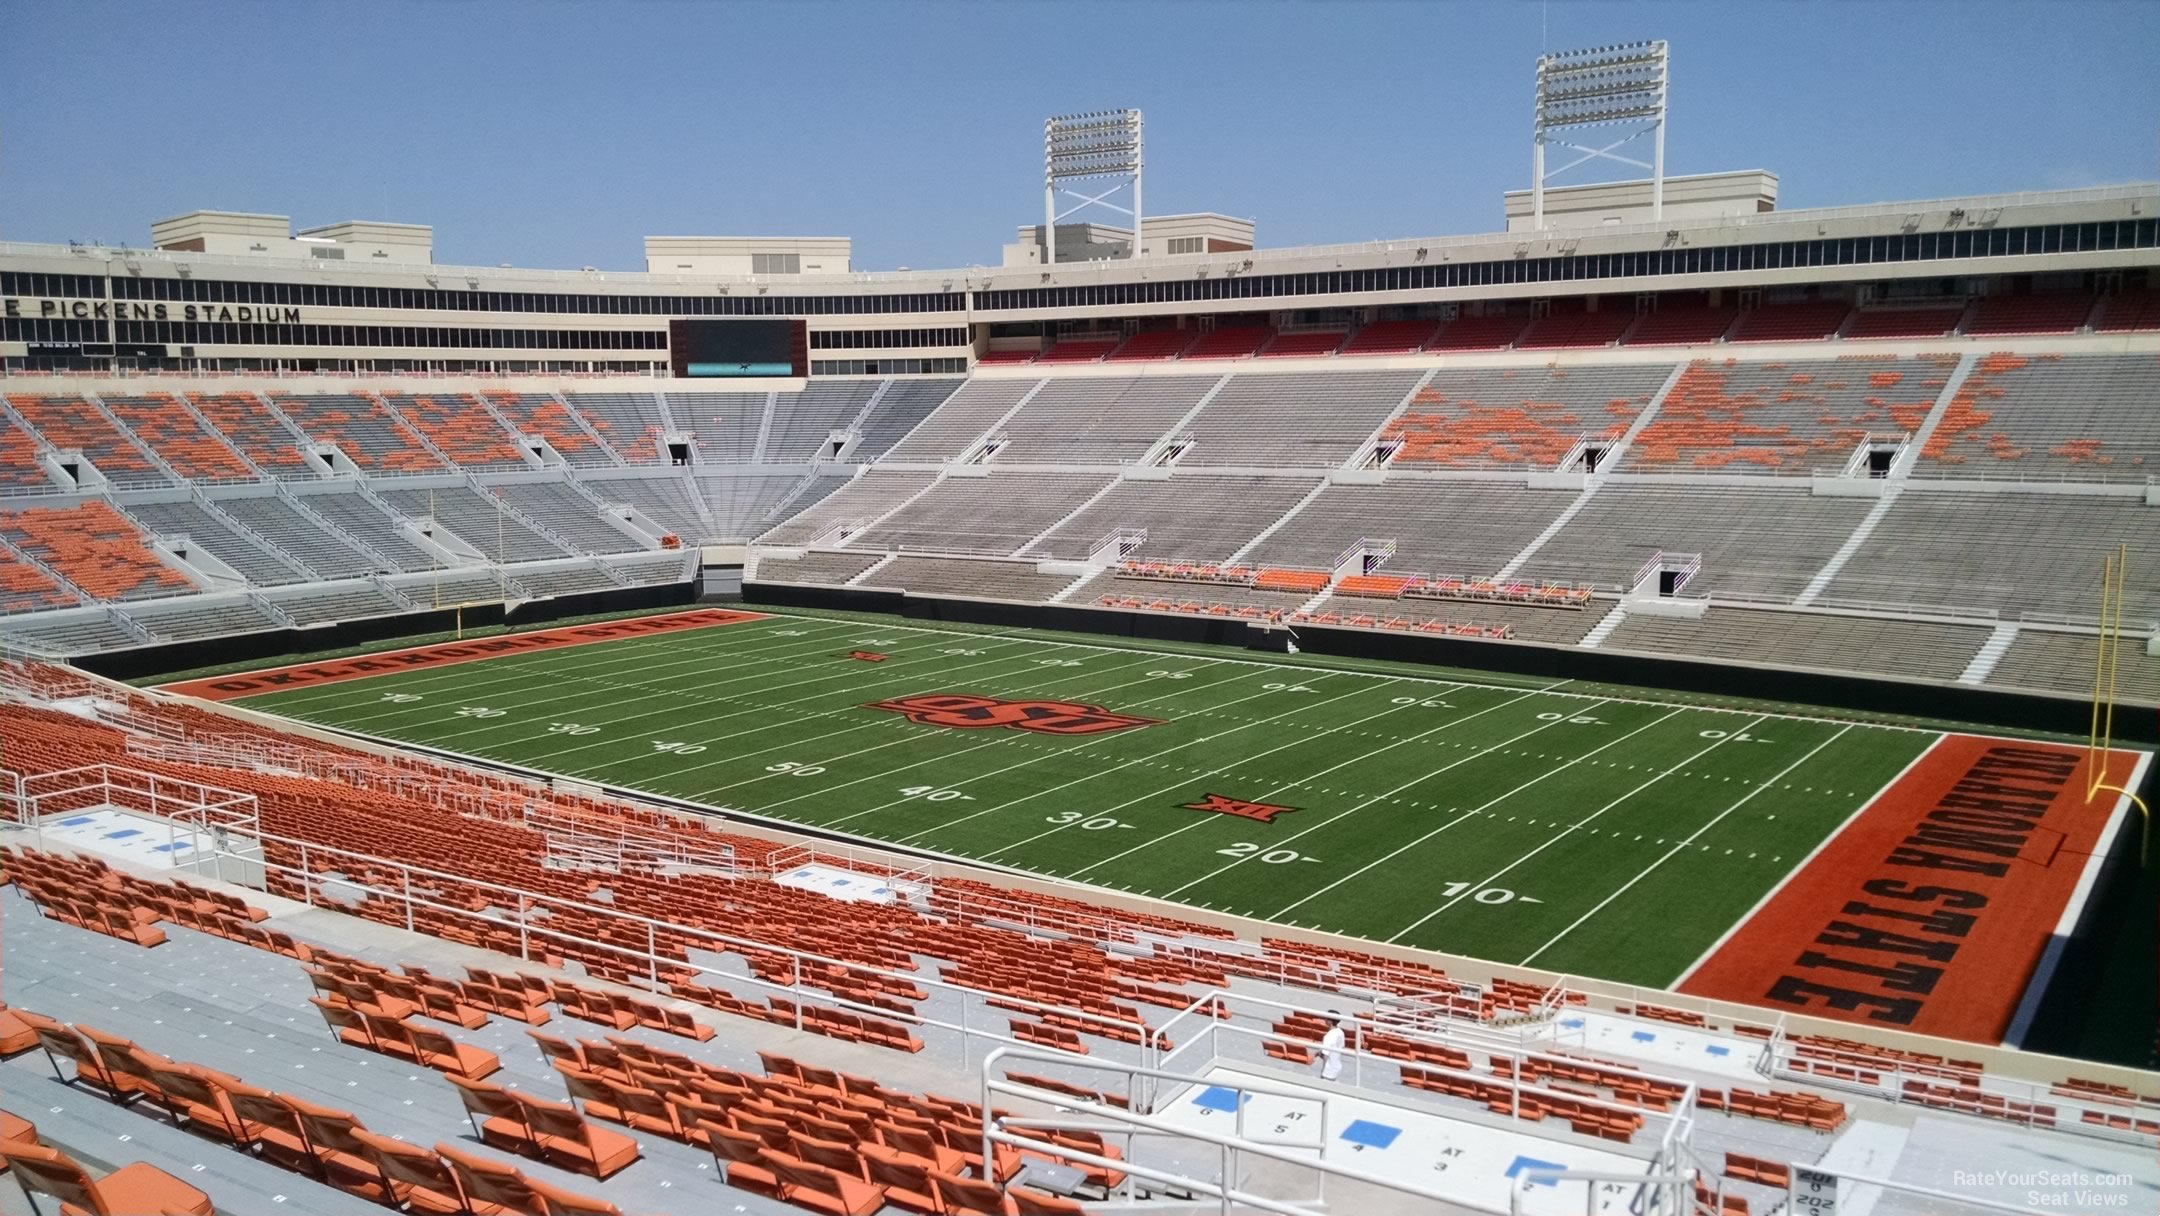 section 301, row 19 seat view  - boone pickens stadium